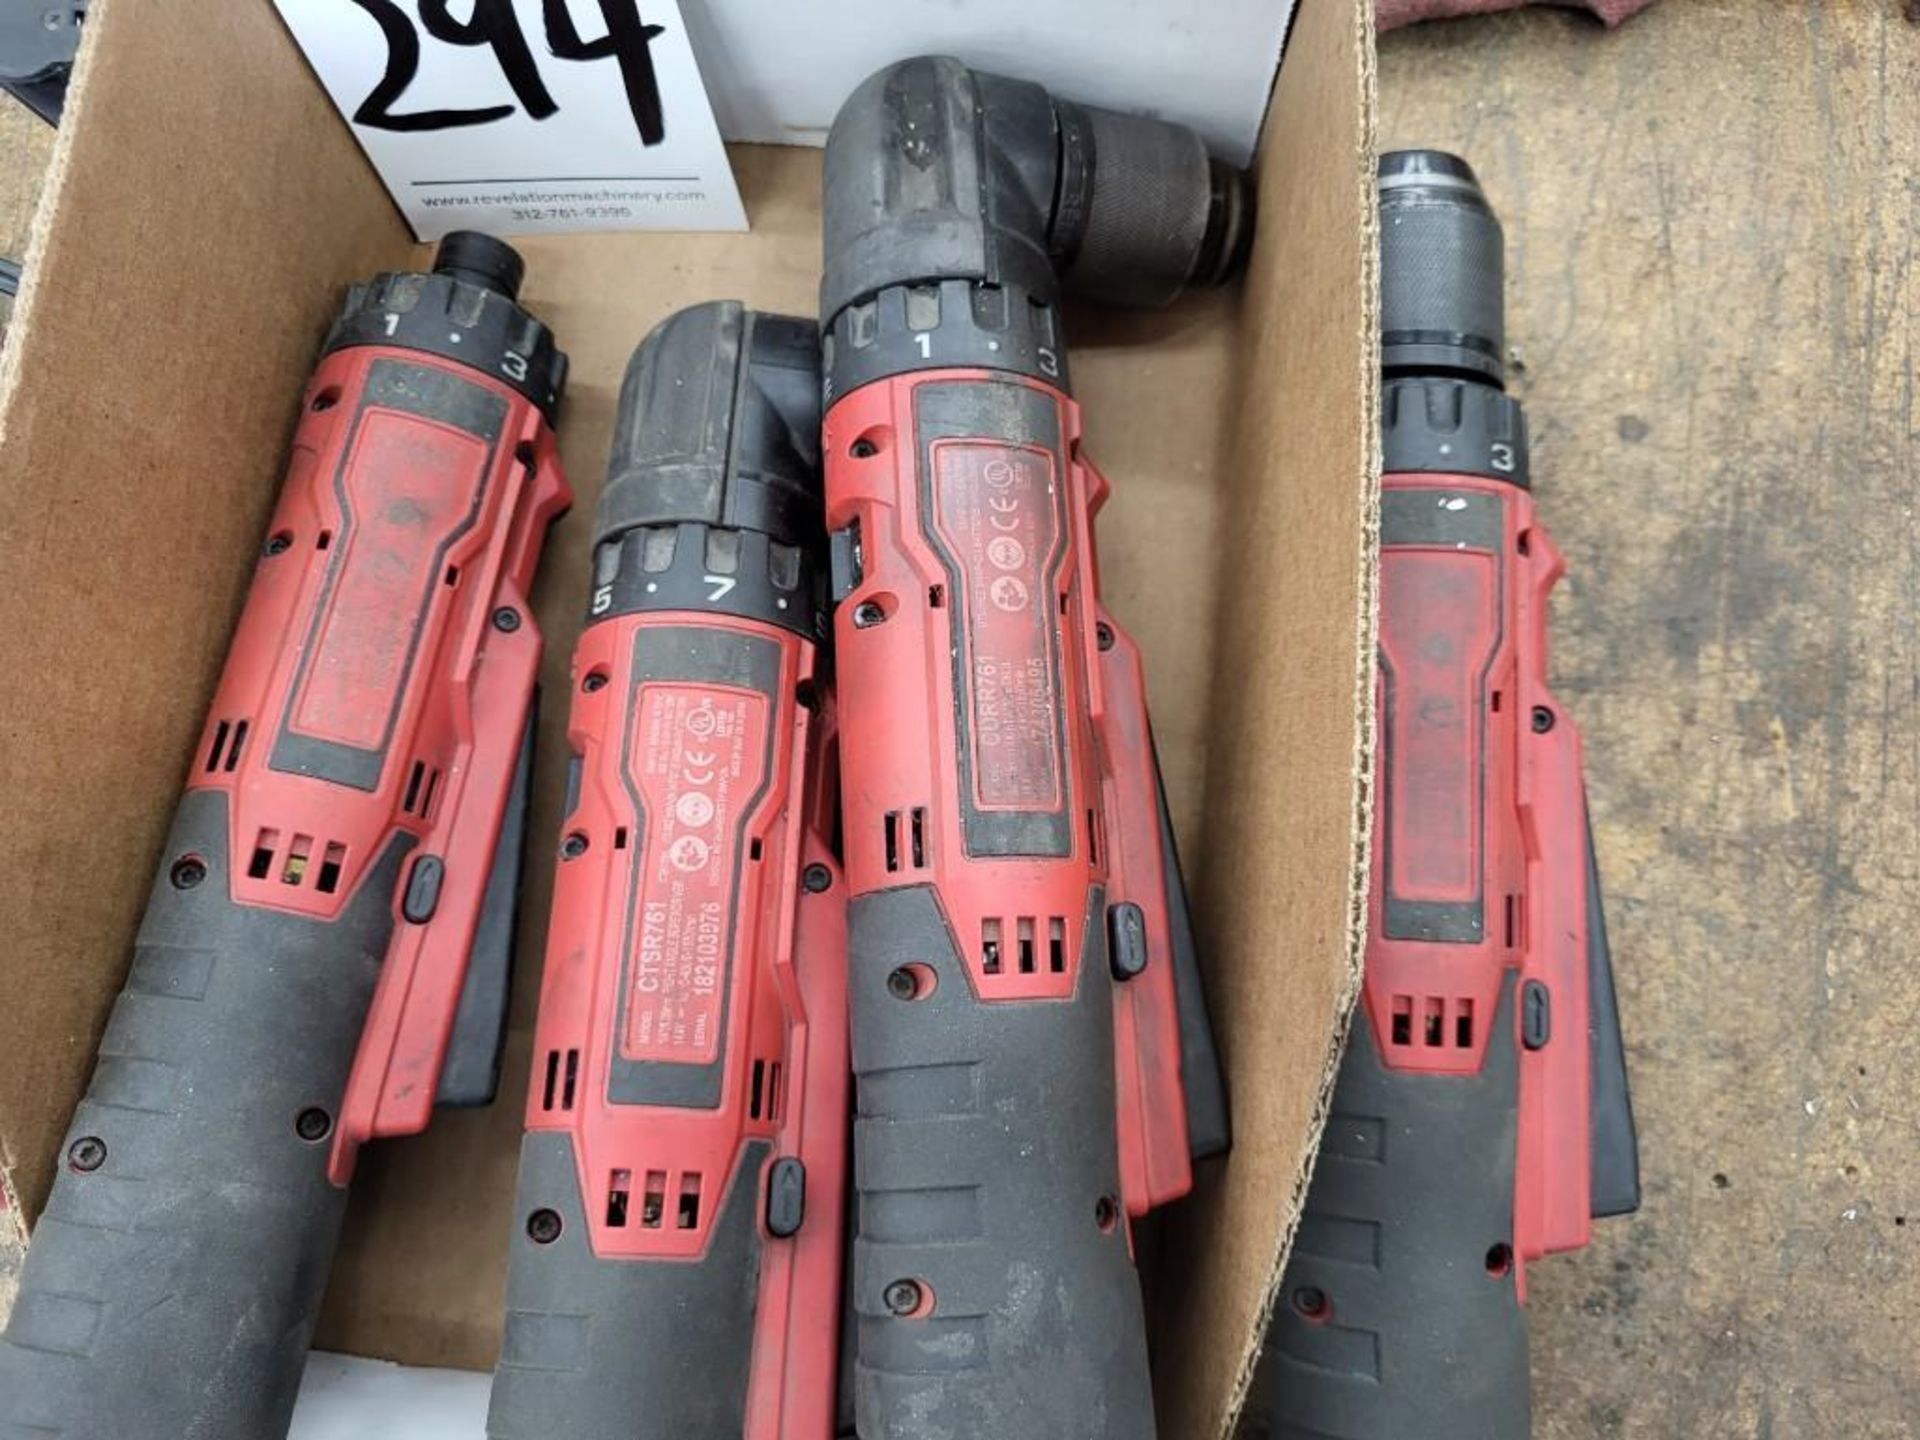 LOT OF SNAP-ON CORDLESS DRILLS AND DRIVERS. WITH CHARGER AND BATTERIES - Image 4 of 6